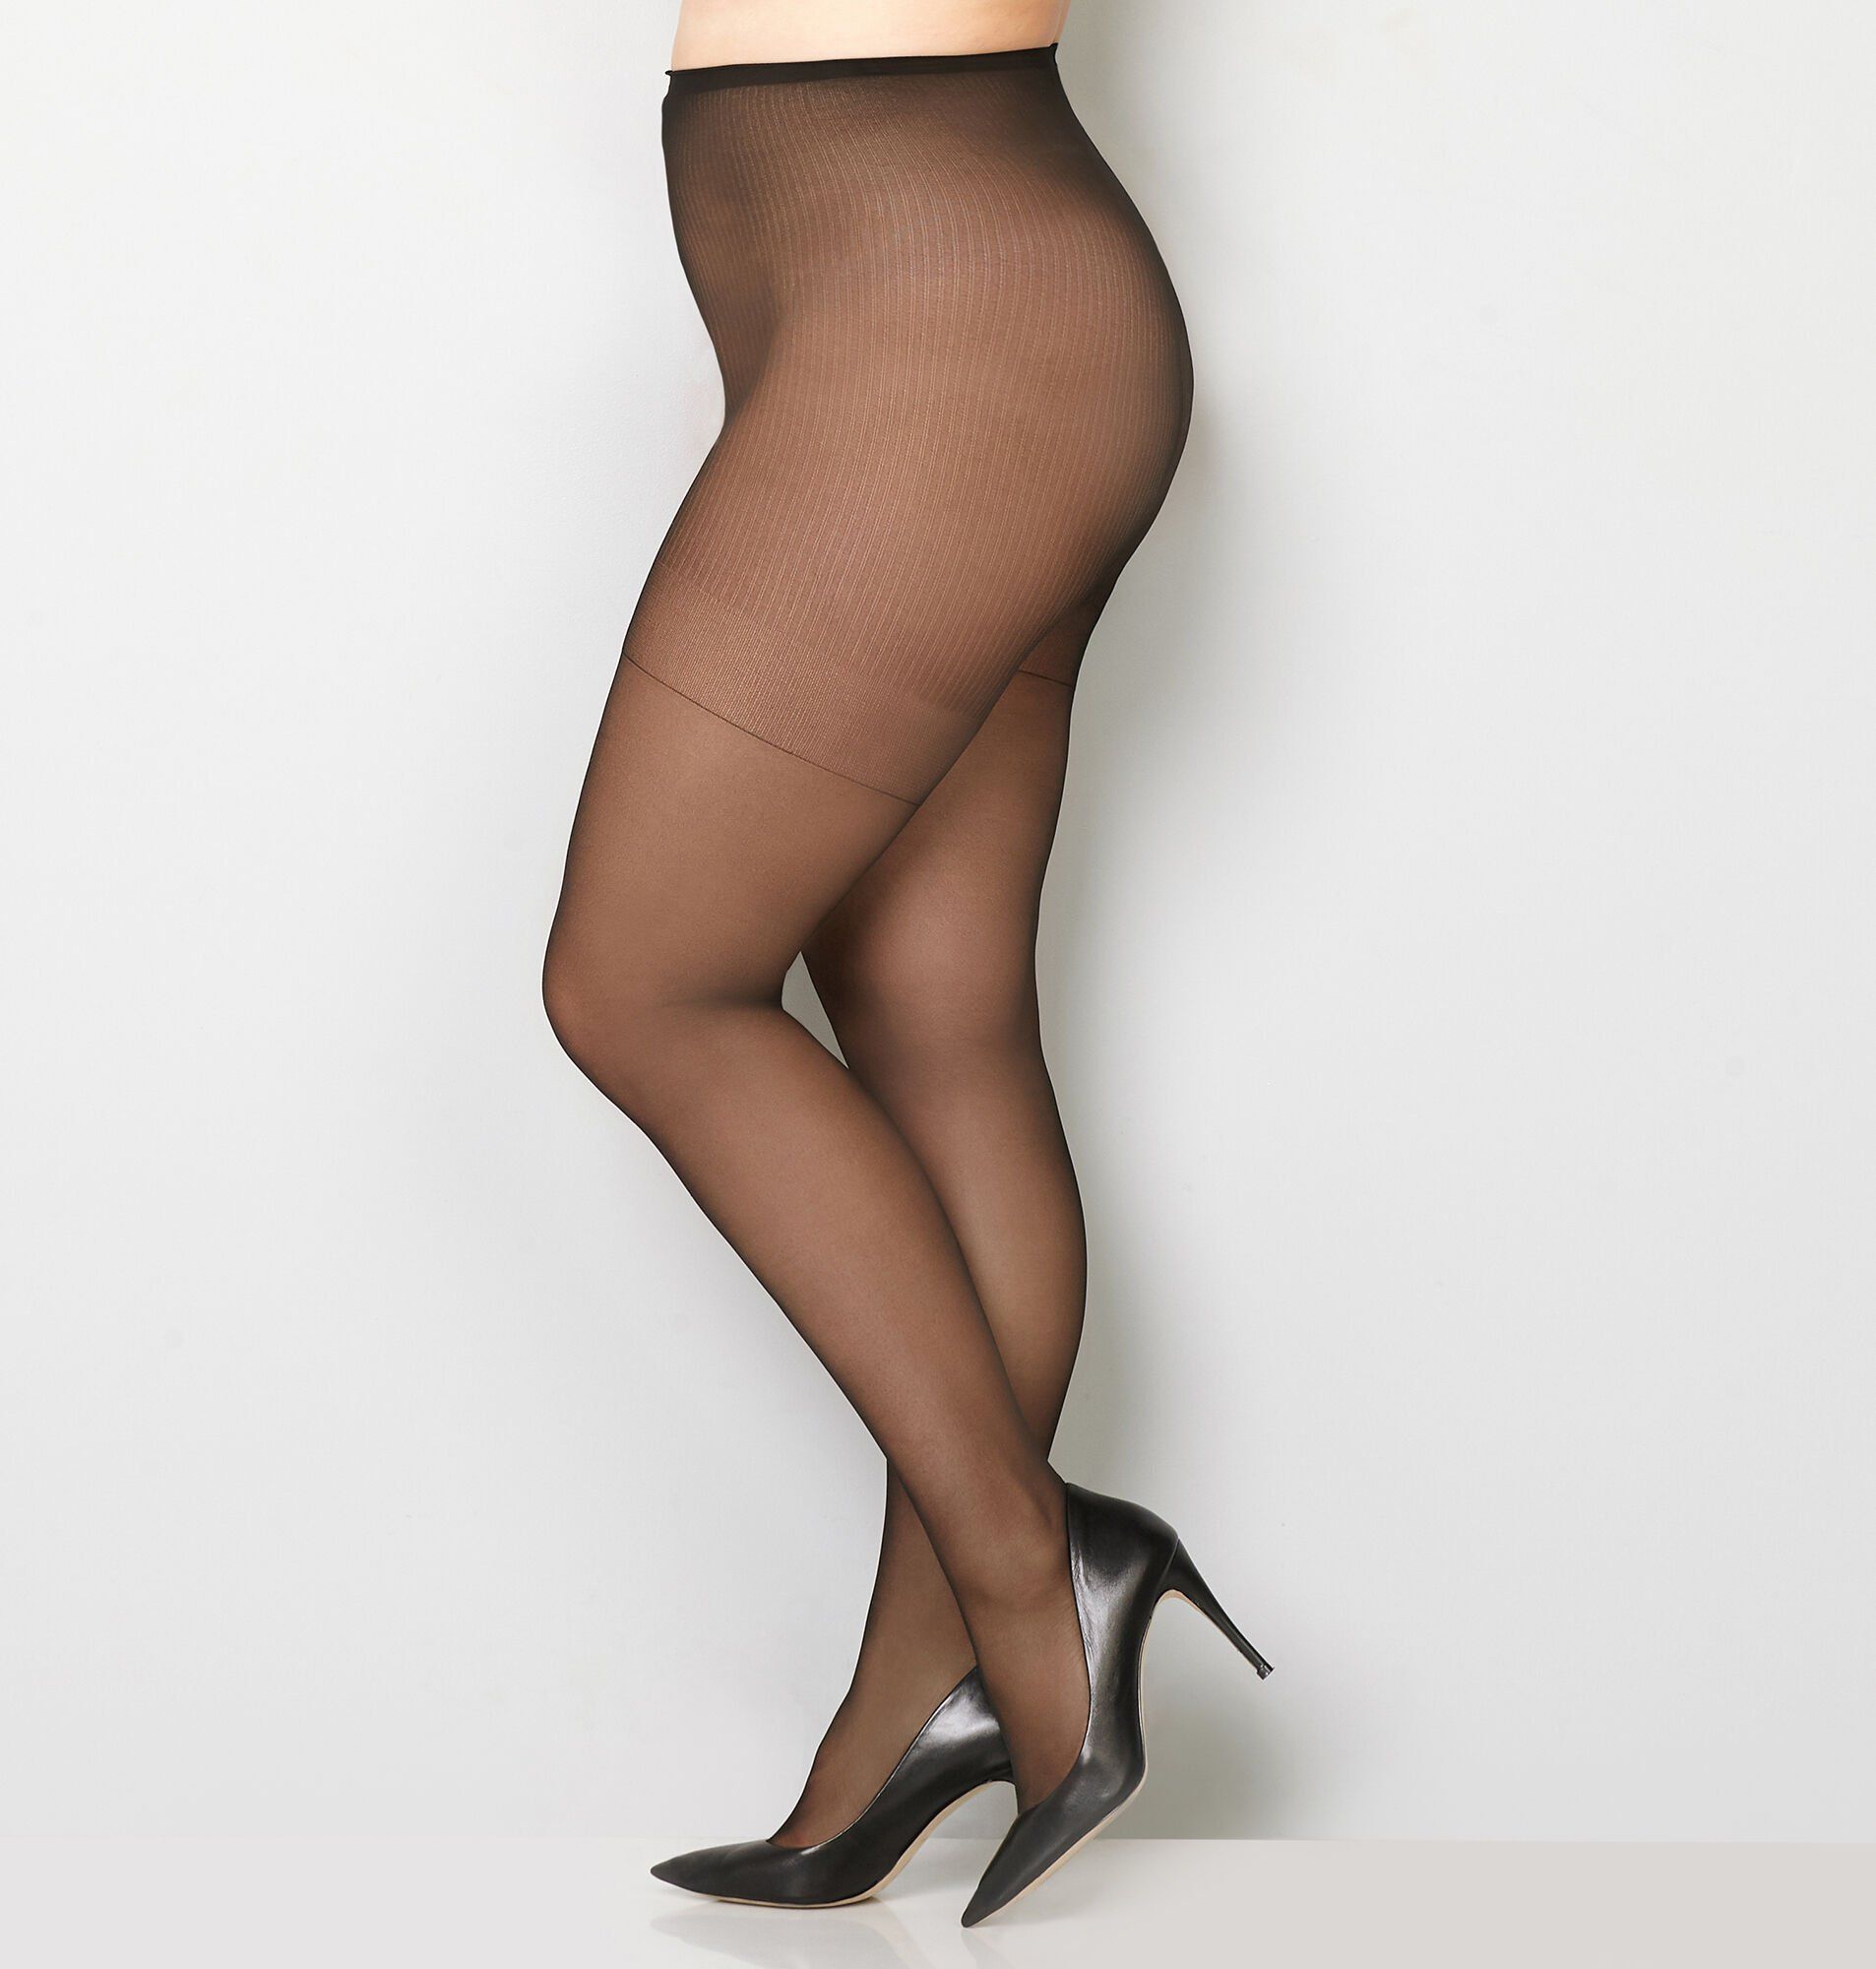 best of Pantyhose Plus pic size